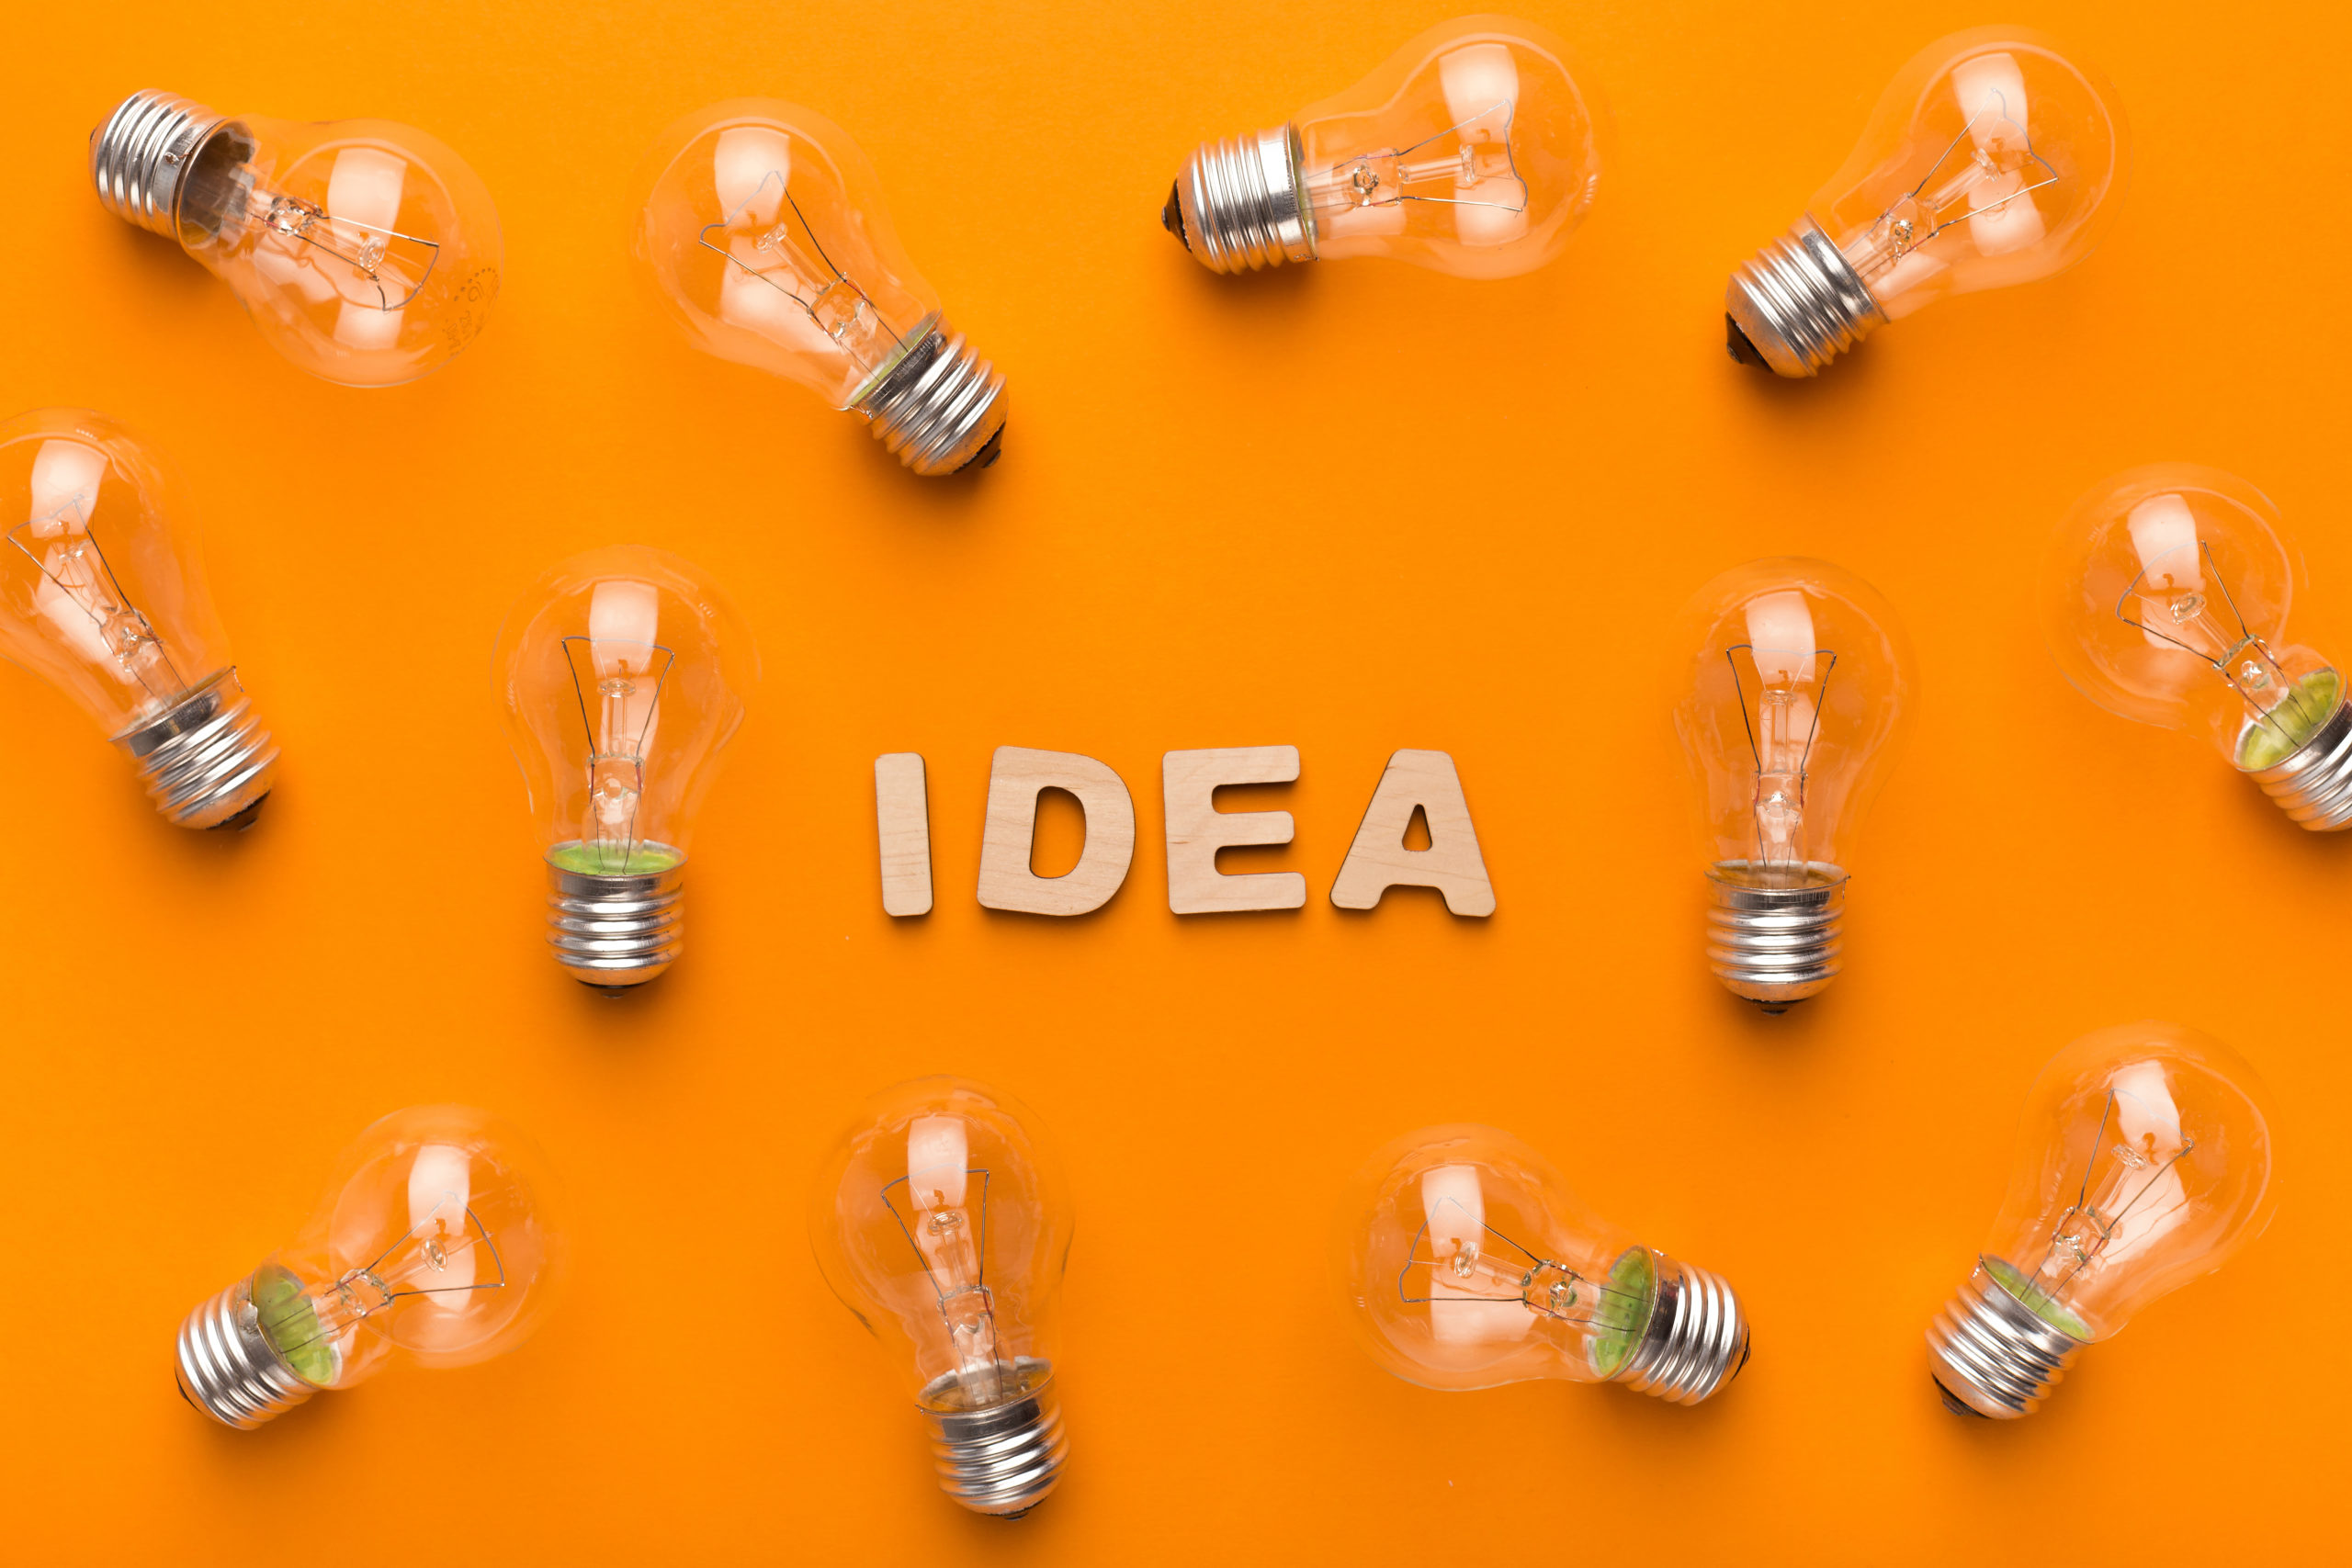 “Ideas” word art with light bulb images